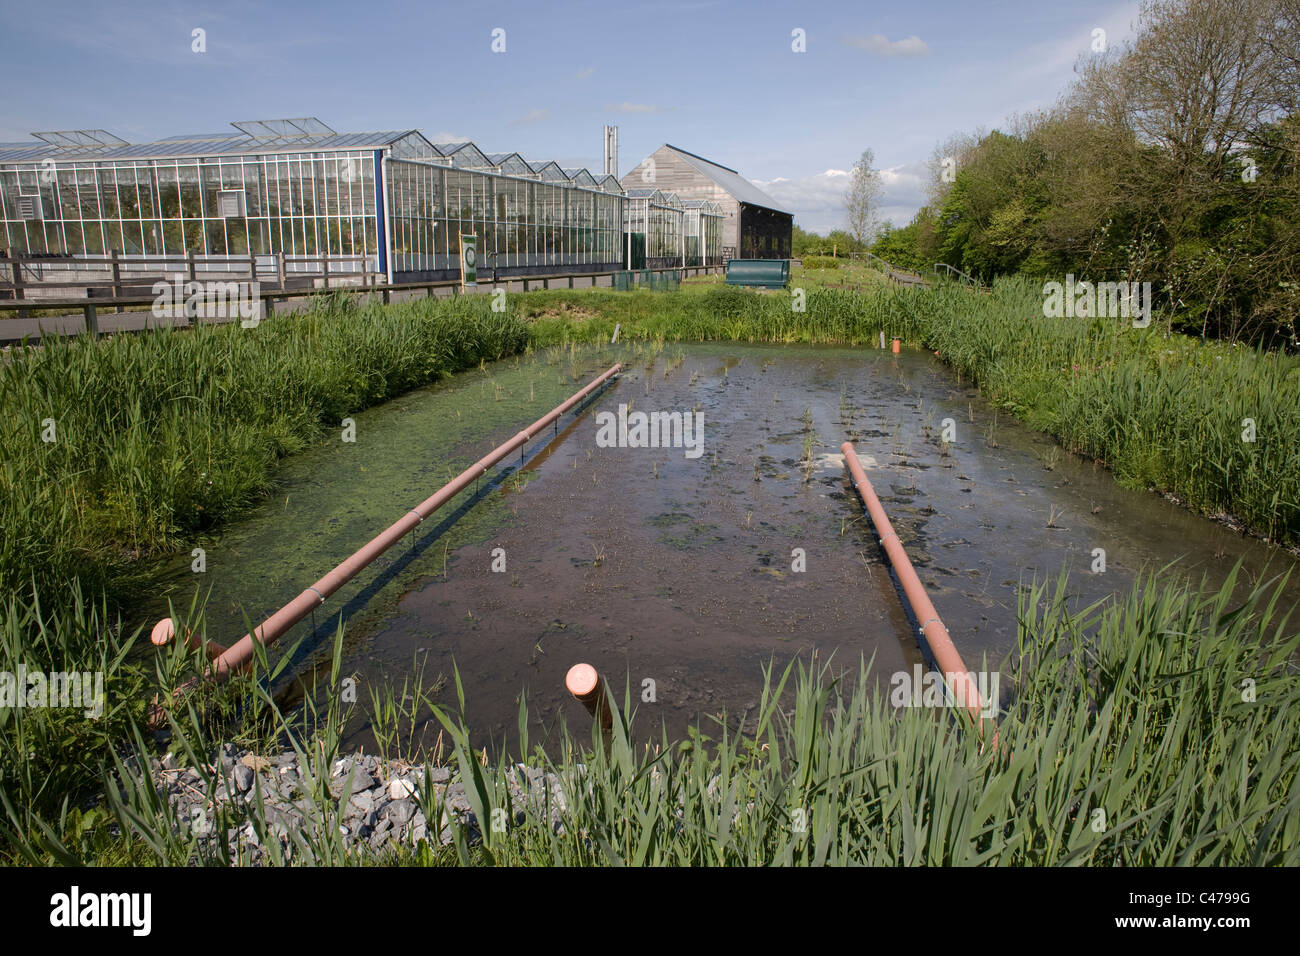 National botanic garden of Wales, water cleansing pool by nursery glasshouses Stock Photo